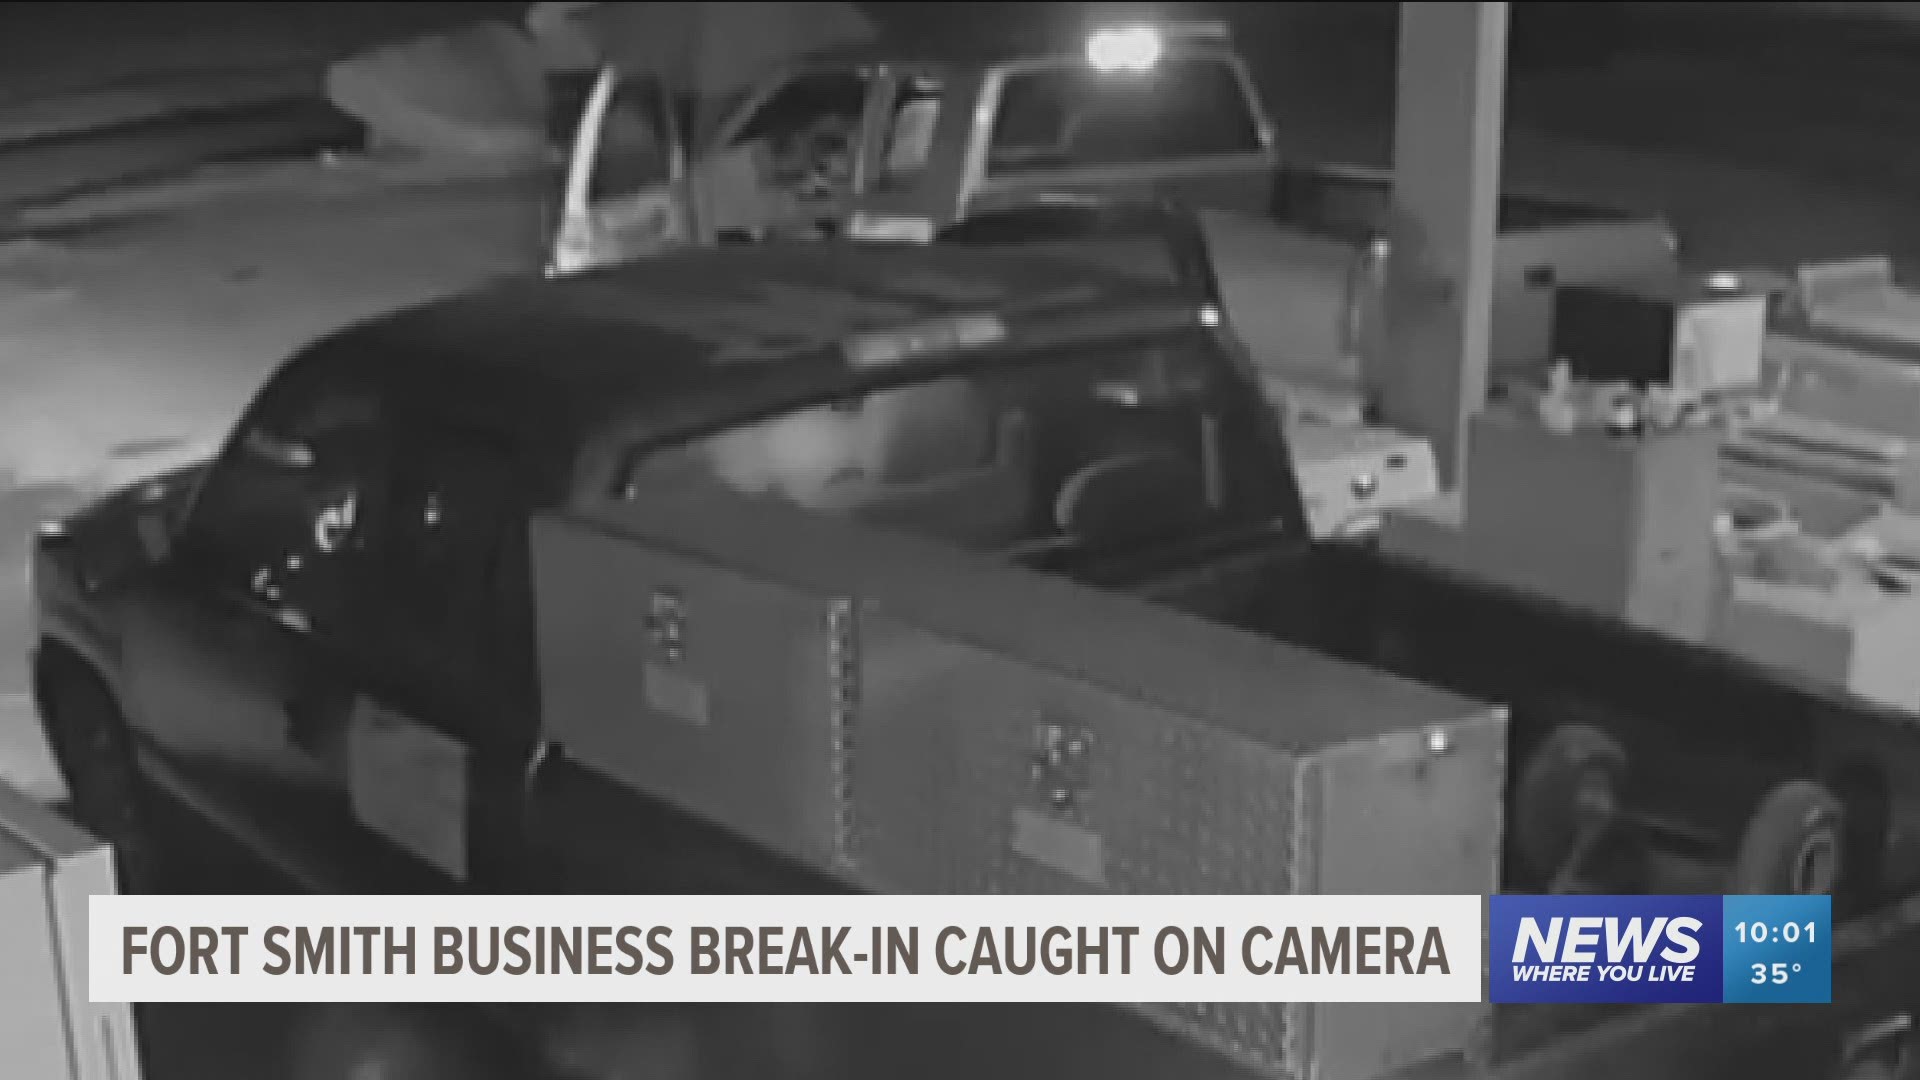 Two suspects were caught on camera breaking into vehicles at 2nd Chance Appliances in downtown Fort Smith.